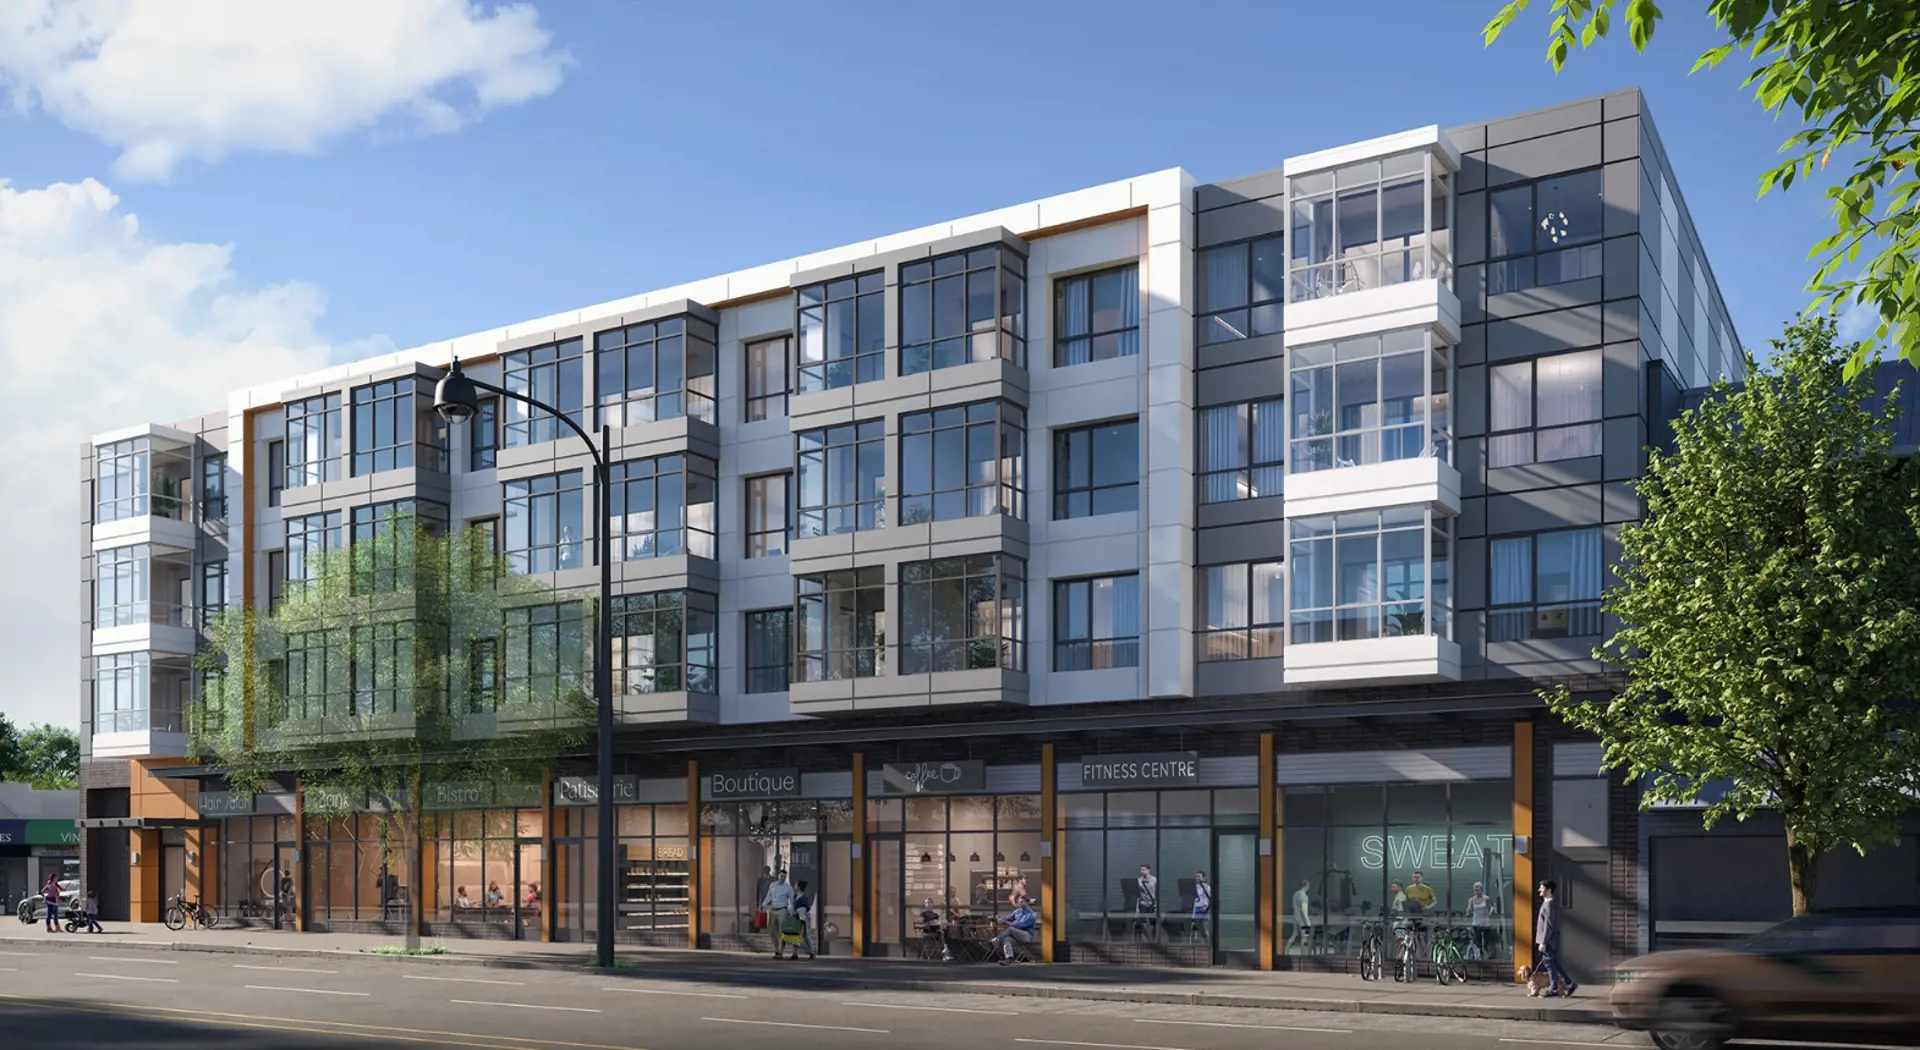 Solid Vancouver by Hana Ventures is a Kingsway corridor mixed-use lowrise with 52 condominiums